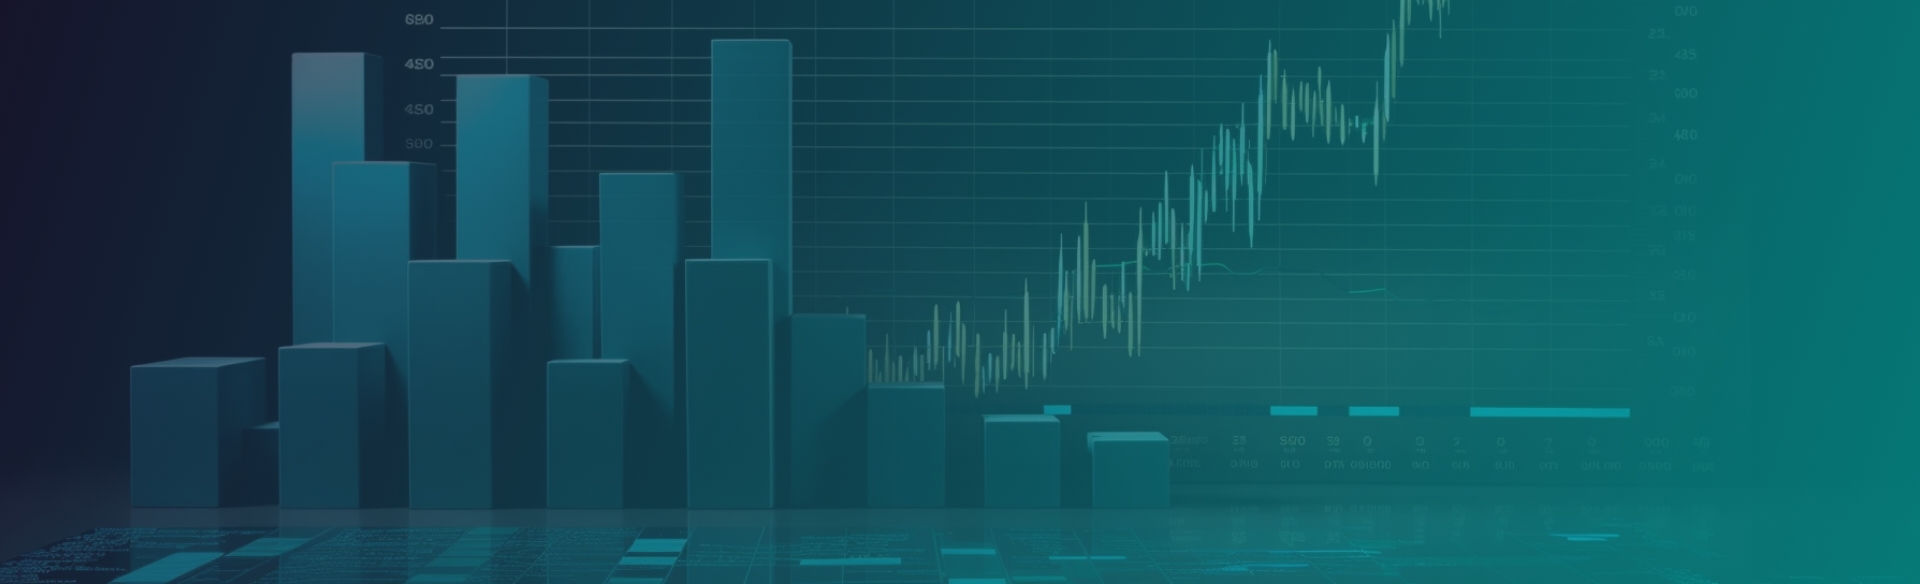 Financial Analytics with a 3D bar graph and line chart on a dark background